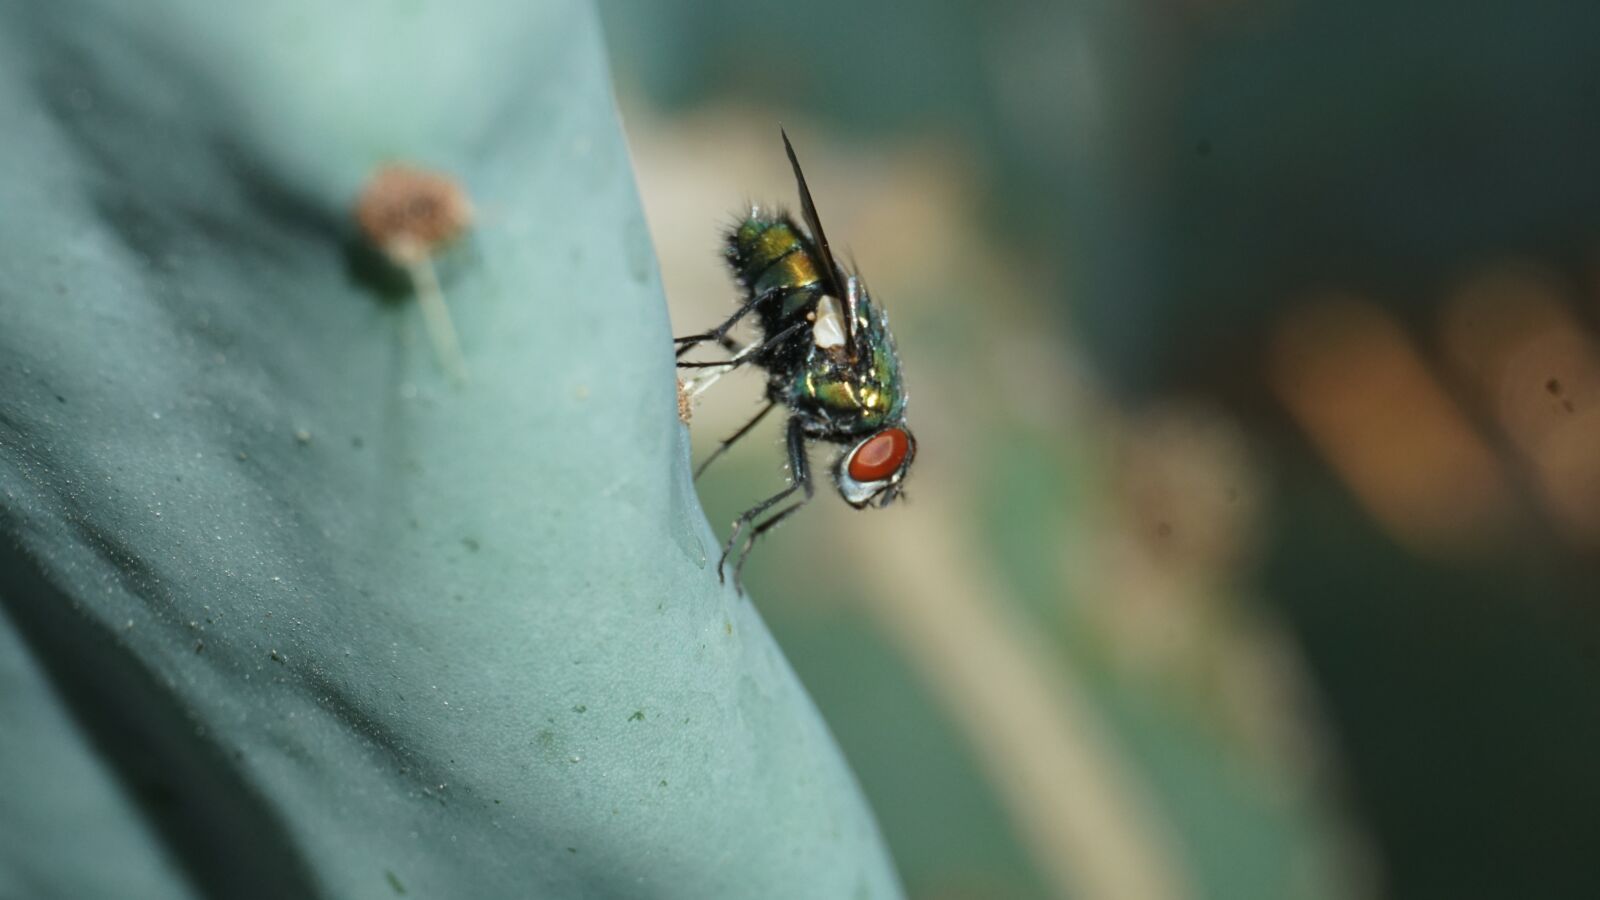 Sony a6300 sample photo. Fly, insect, bug photography